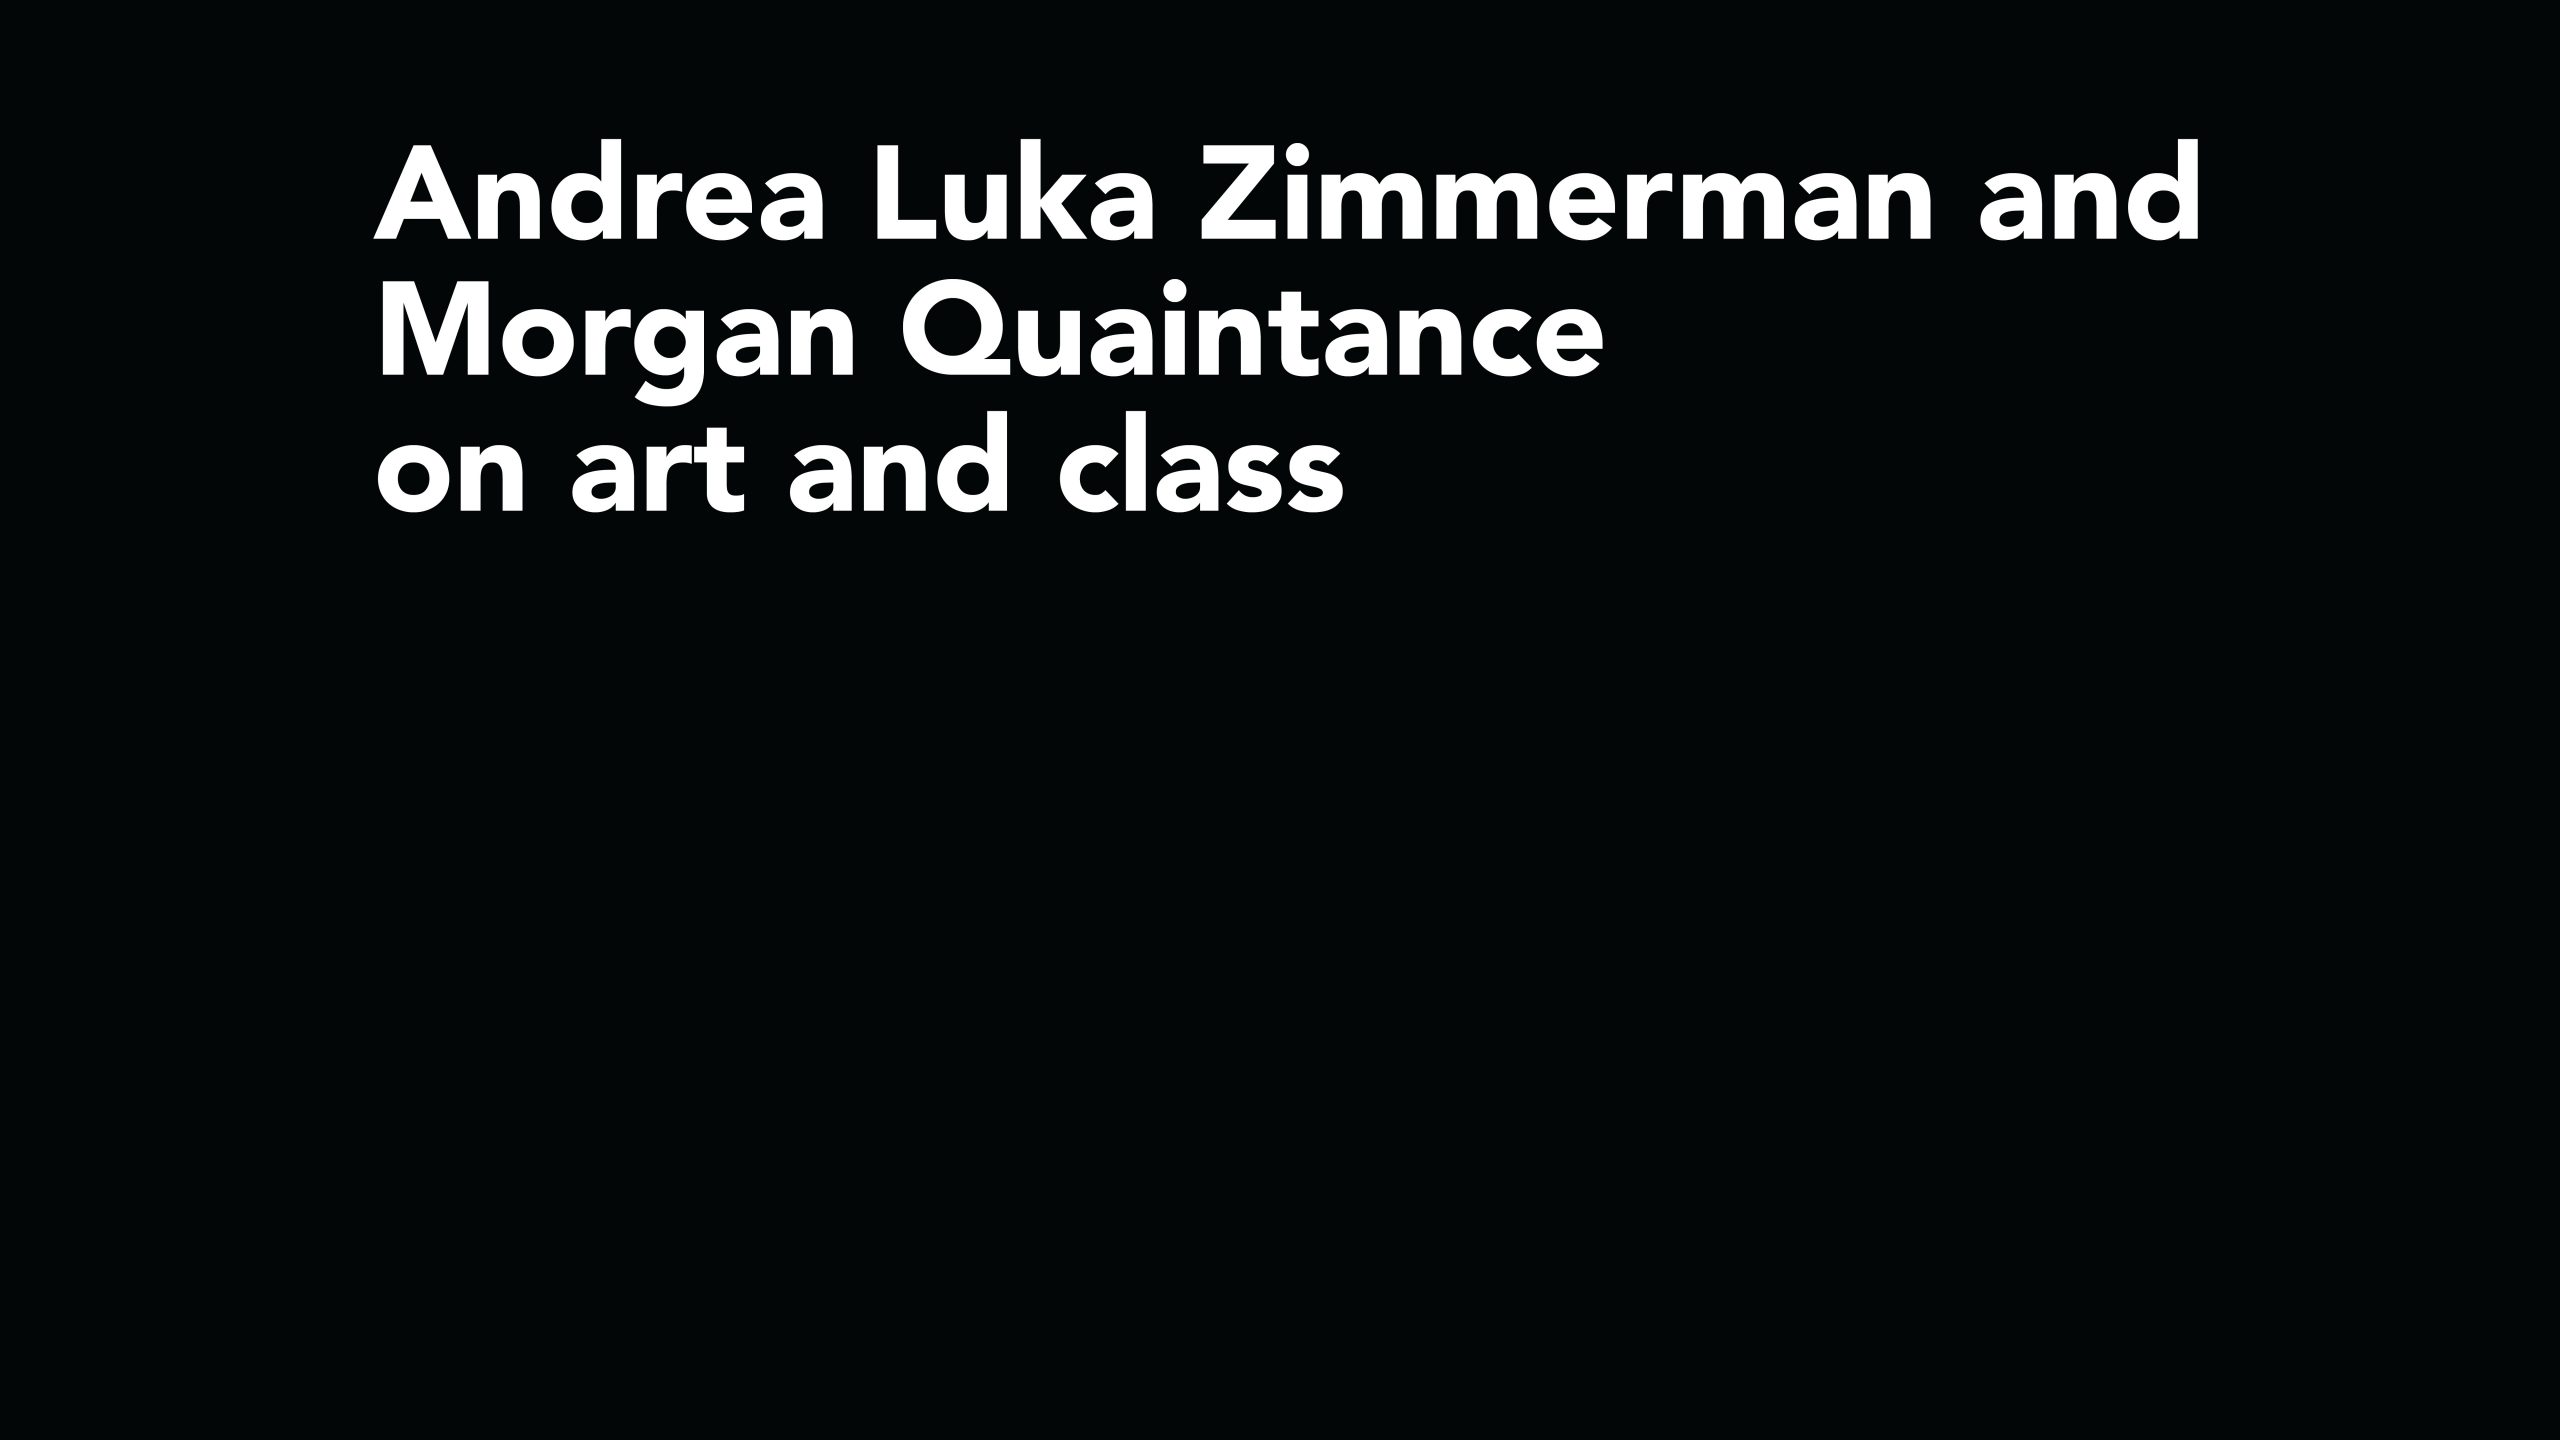 A black card that has captions on the top which reads “Andrea Luka Zimmerman and Morgan Quaintance on art and class”